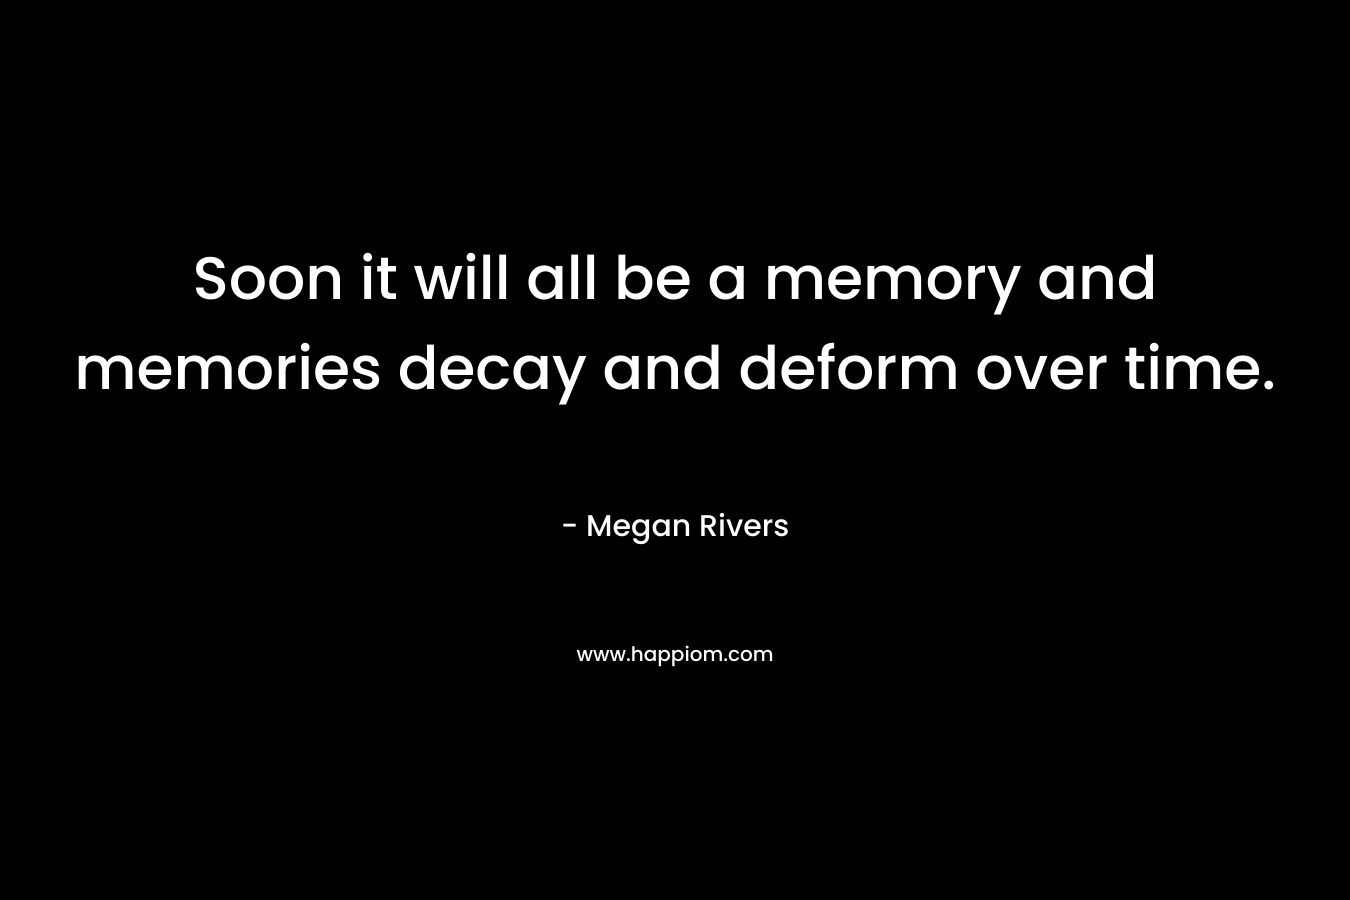 Soon it will all be a memory and memories decay and deform over time.